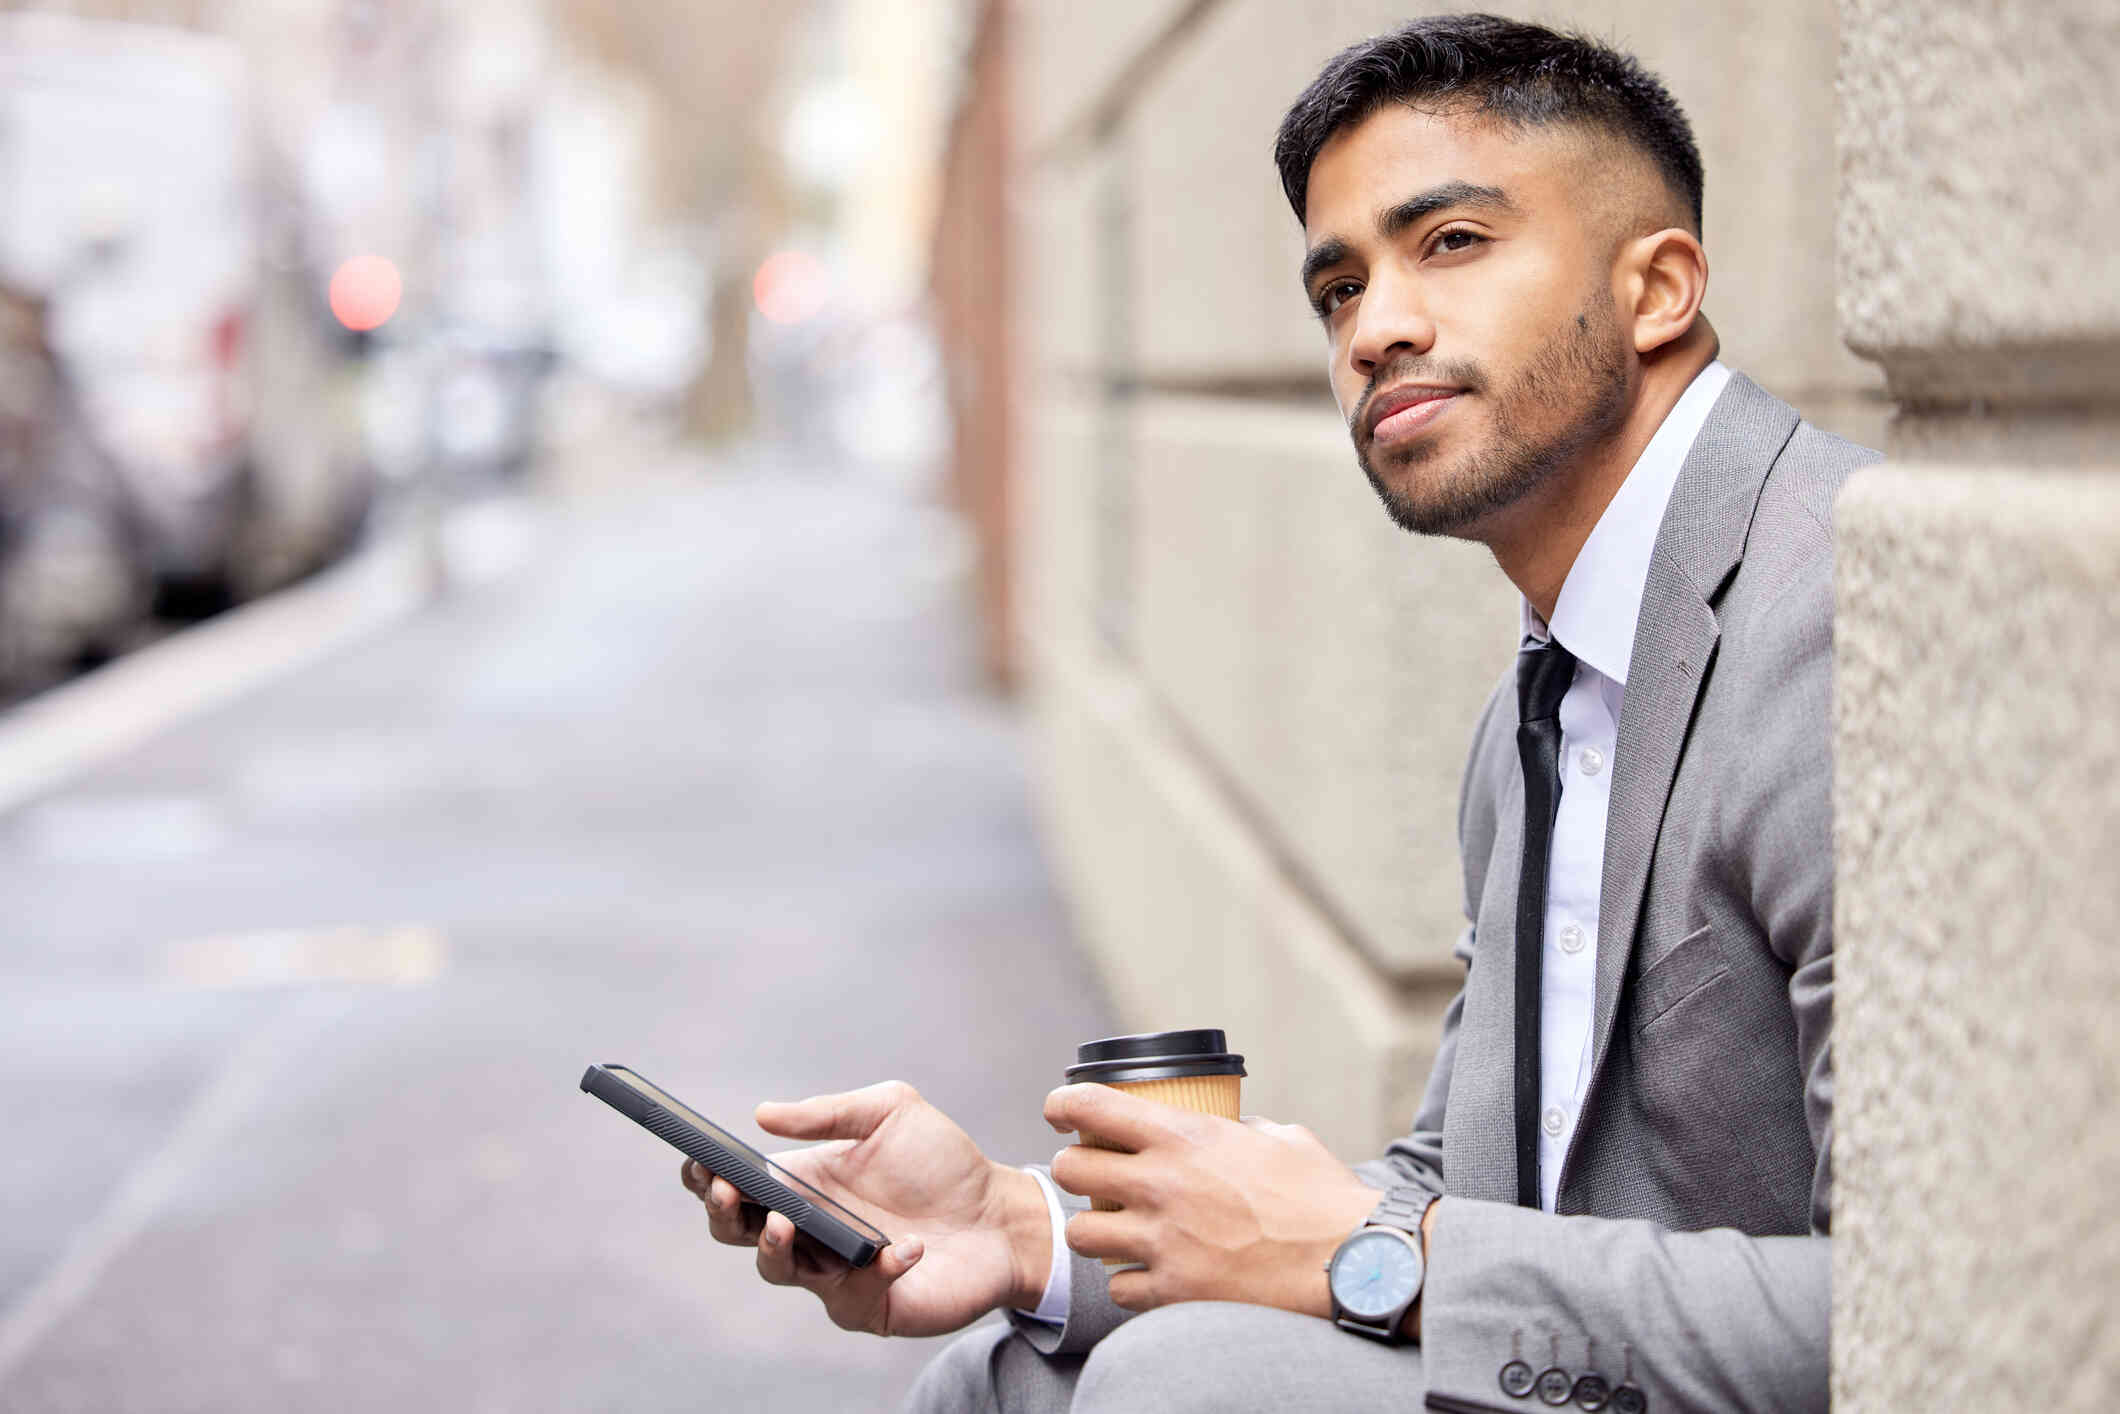 A man in a suit sits on a step outside and holds a cup of to-go coffee while holding a cellphone in the other hand and gazing off while deep in thought.